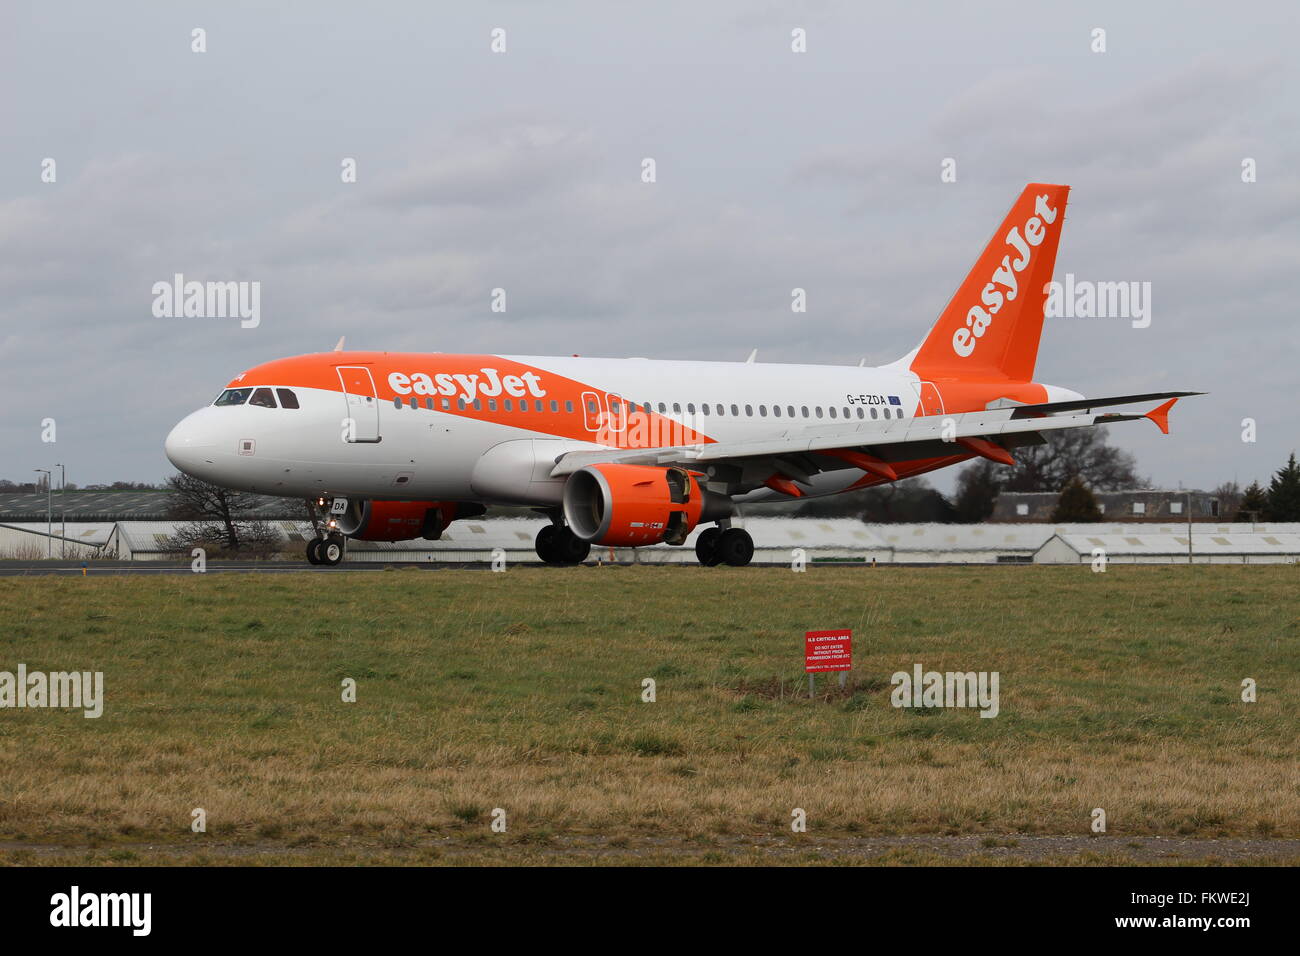 easyjet at london southend airport Stock Photo